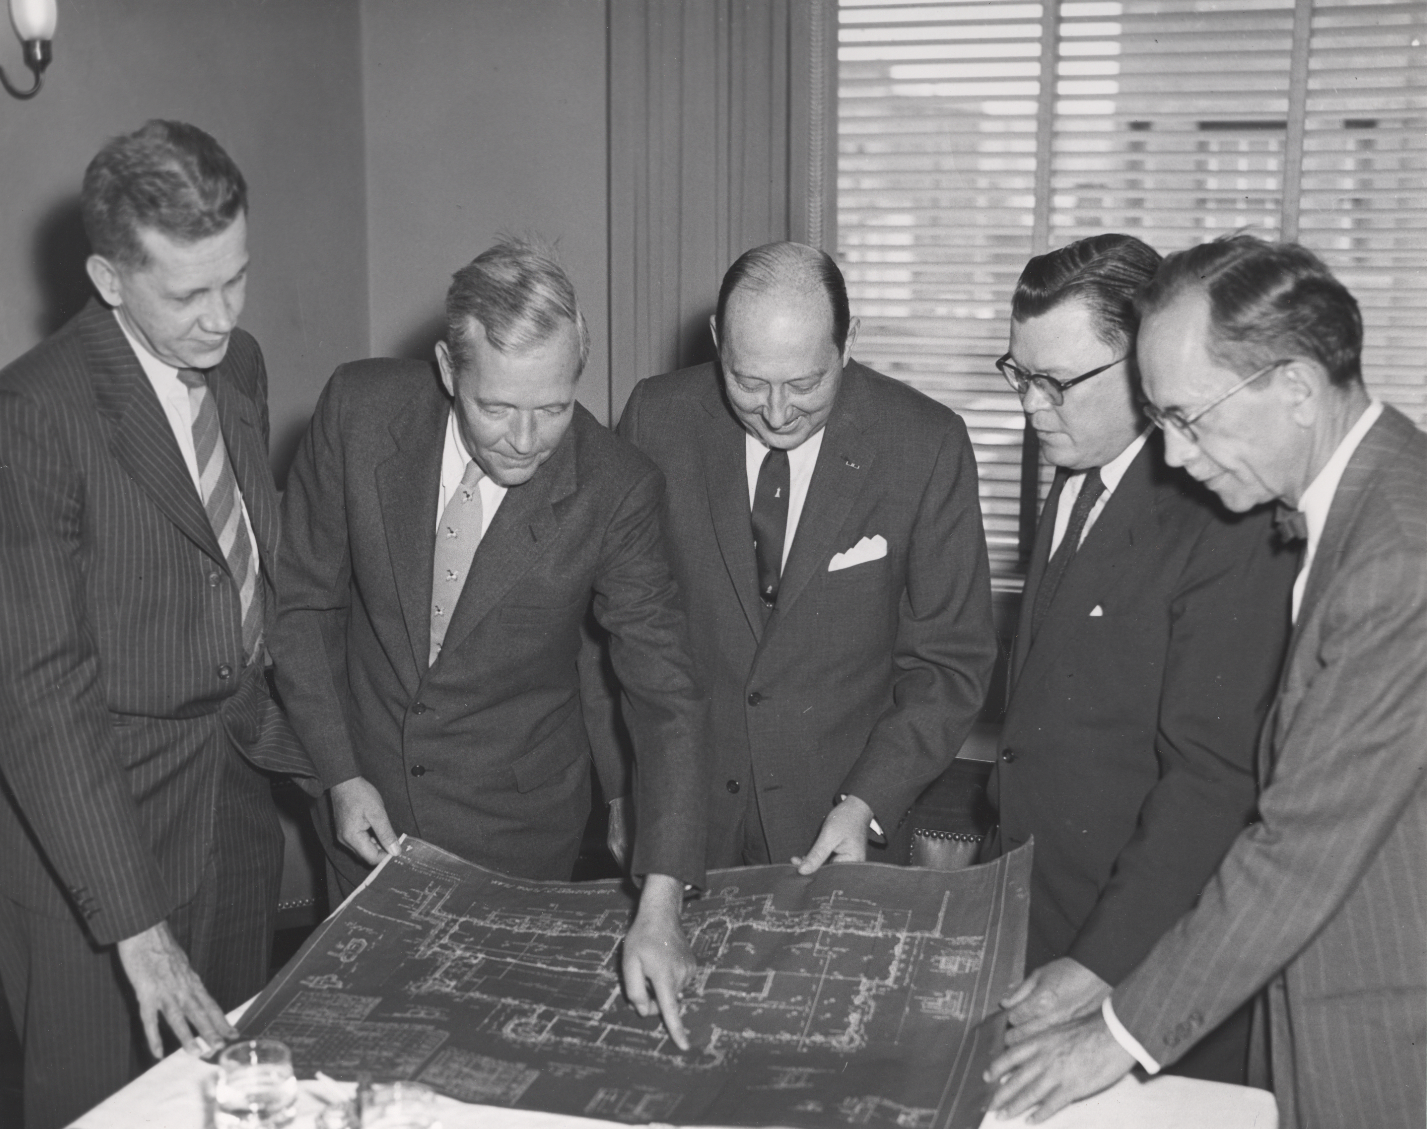 Looking over the blueprints for the George C. Marshall Research Library, no date.